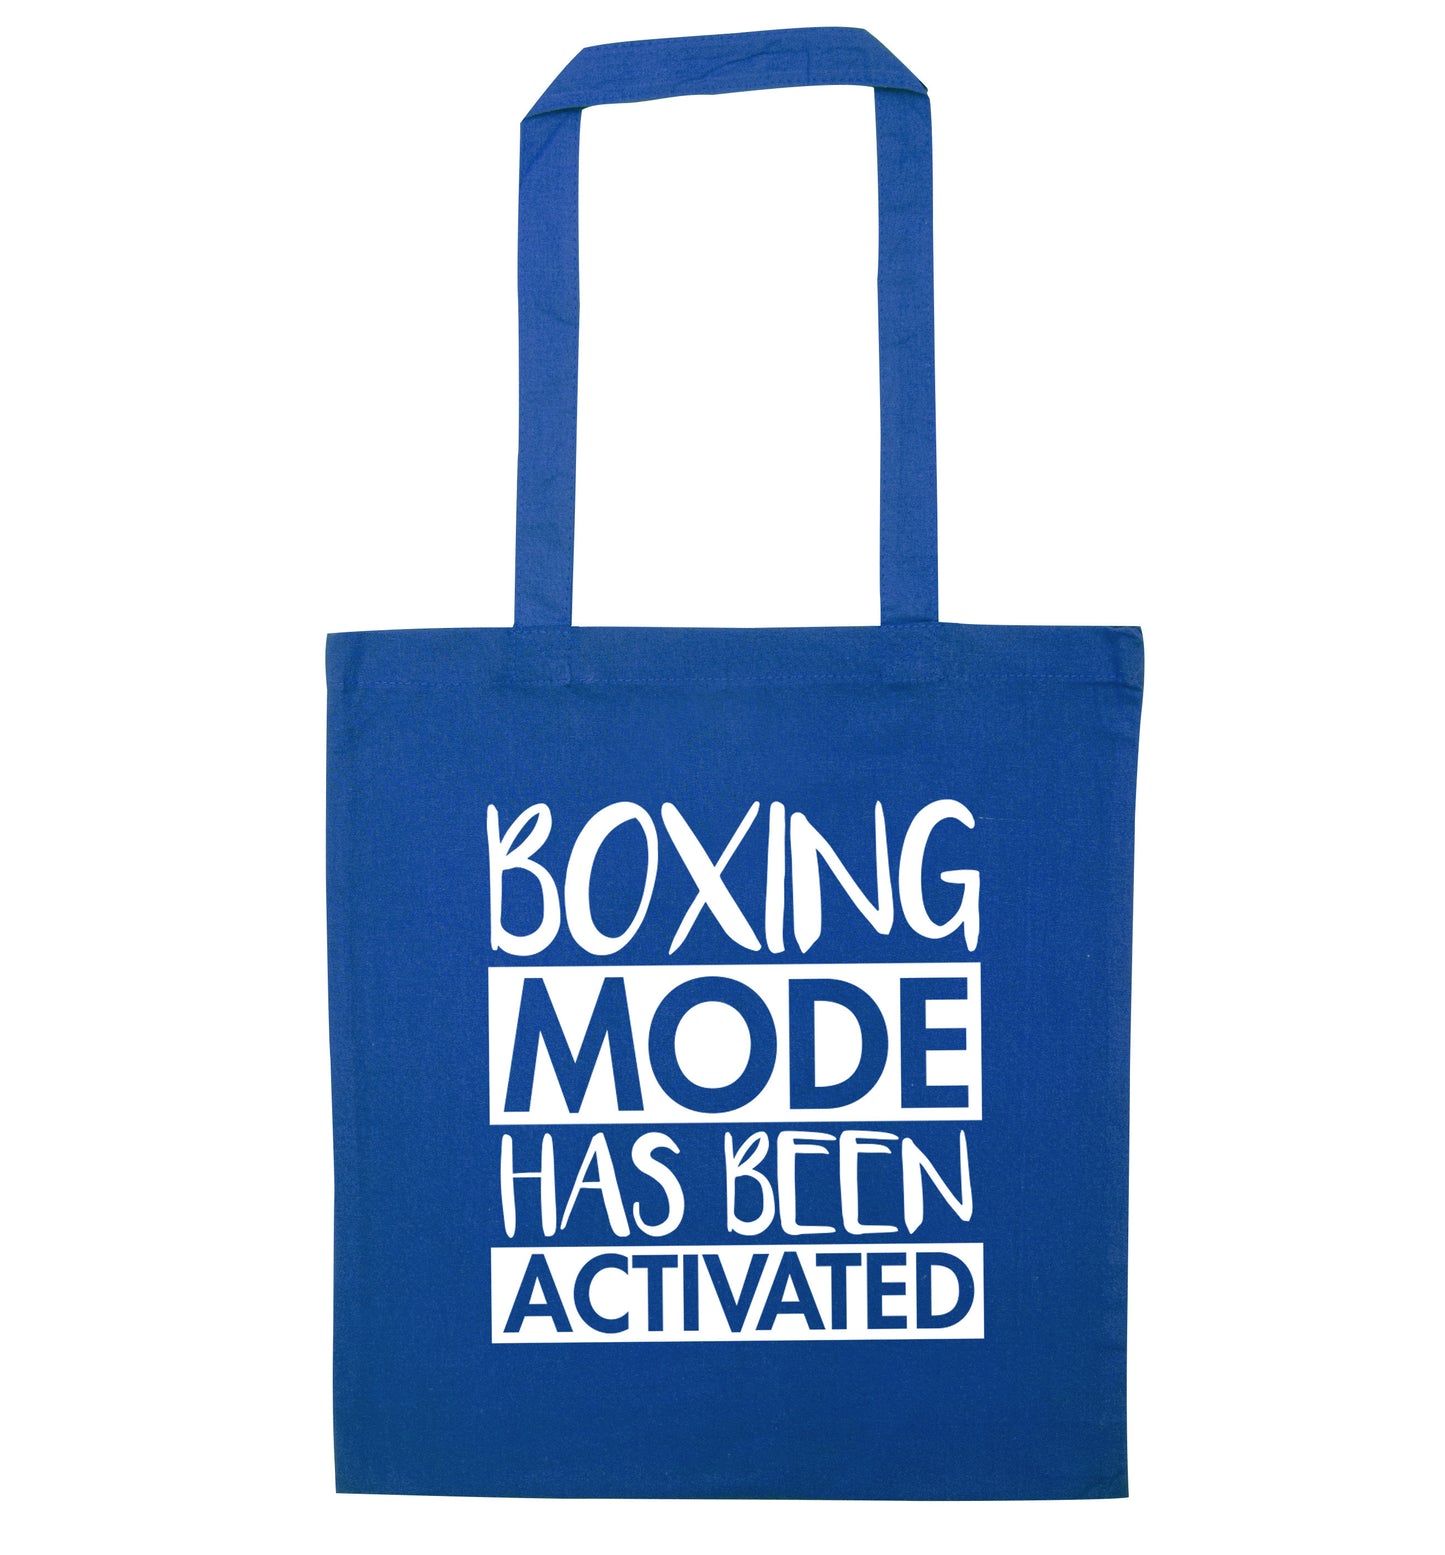 Boxing mode activated blue tote bag